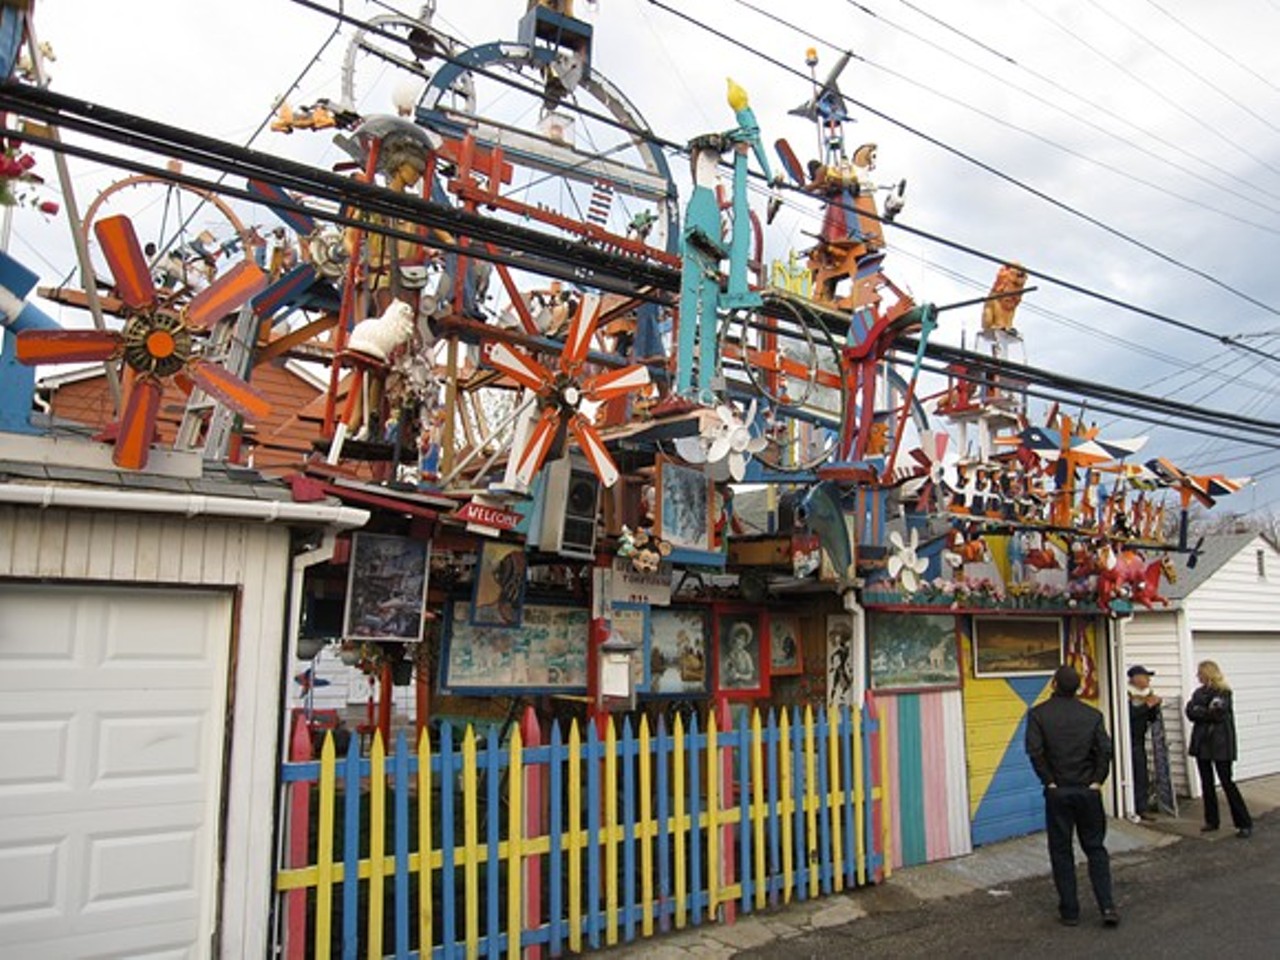 Hamtramck Disneyland2087 Klinger St., HamtramckBegan by Dmytro Szylak, Hamtramck Disneyland is a collection of yard art and folk art positioned atop two garages on a 30-foot backyard. The attraction is open 24 hours a day and is now owned by Hatch Art.
Photo via  Jerry Paffendorf / Flickr CC 